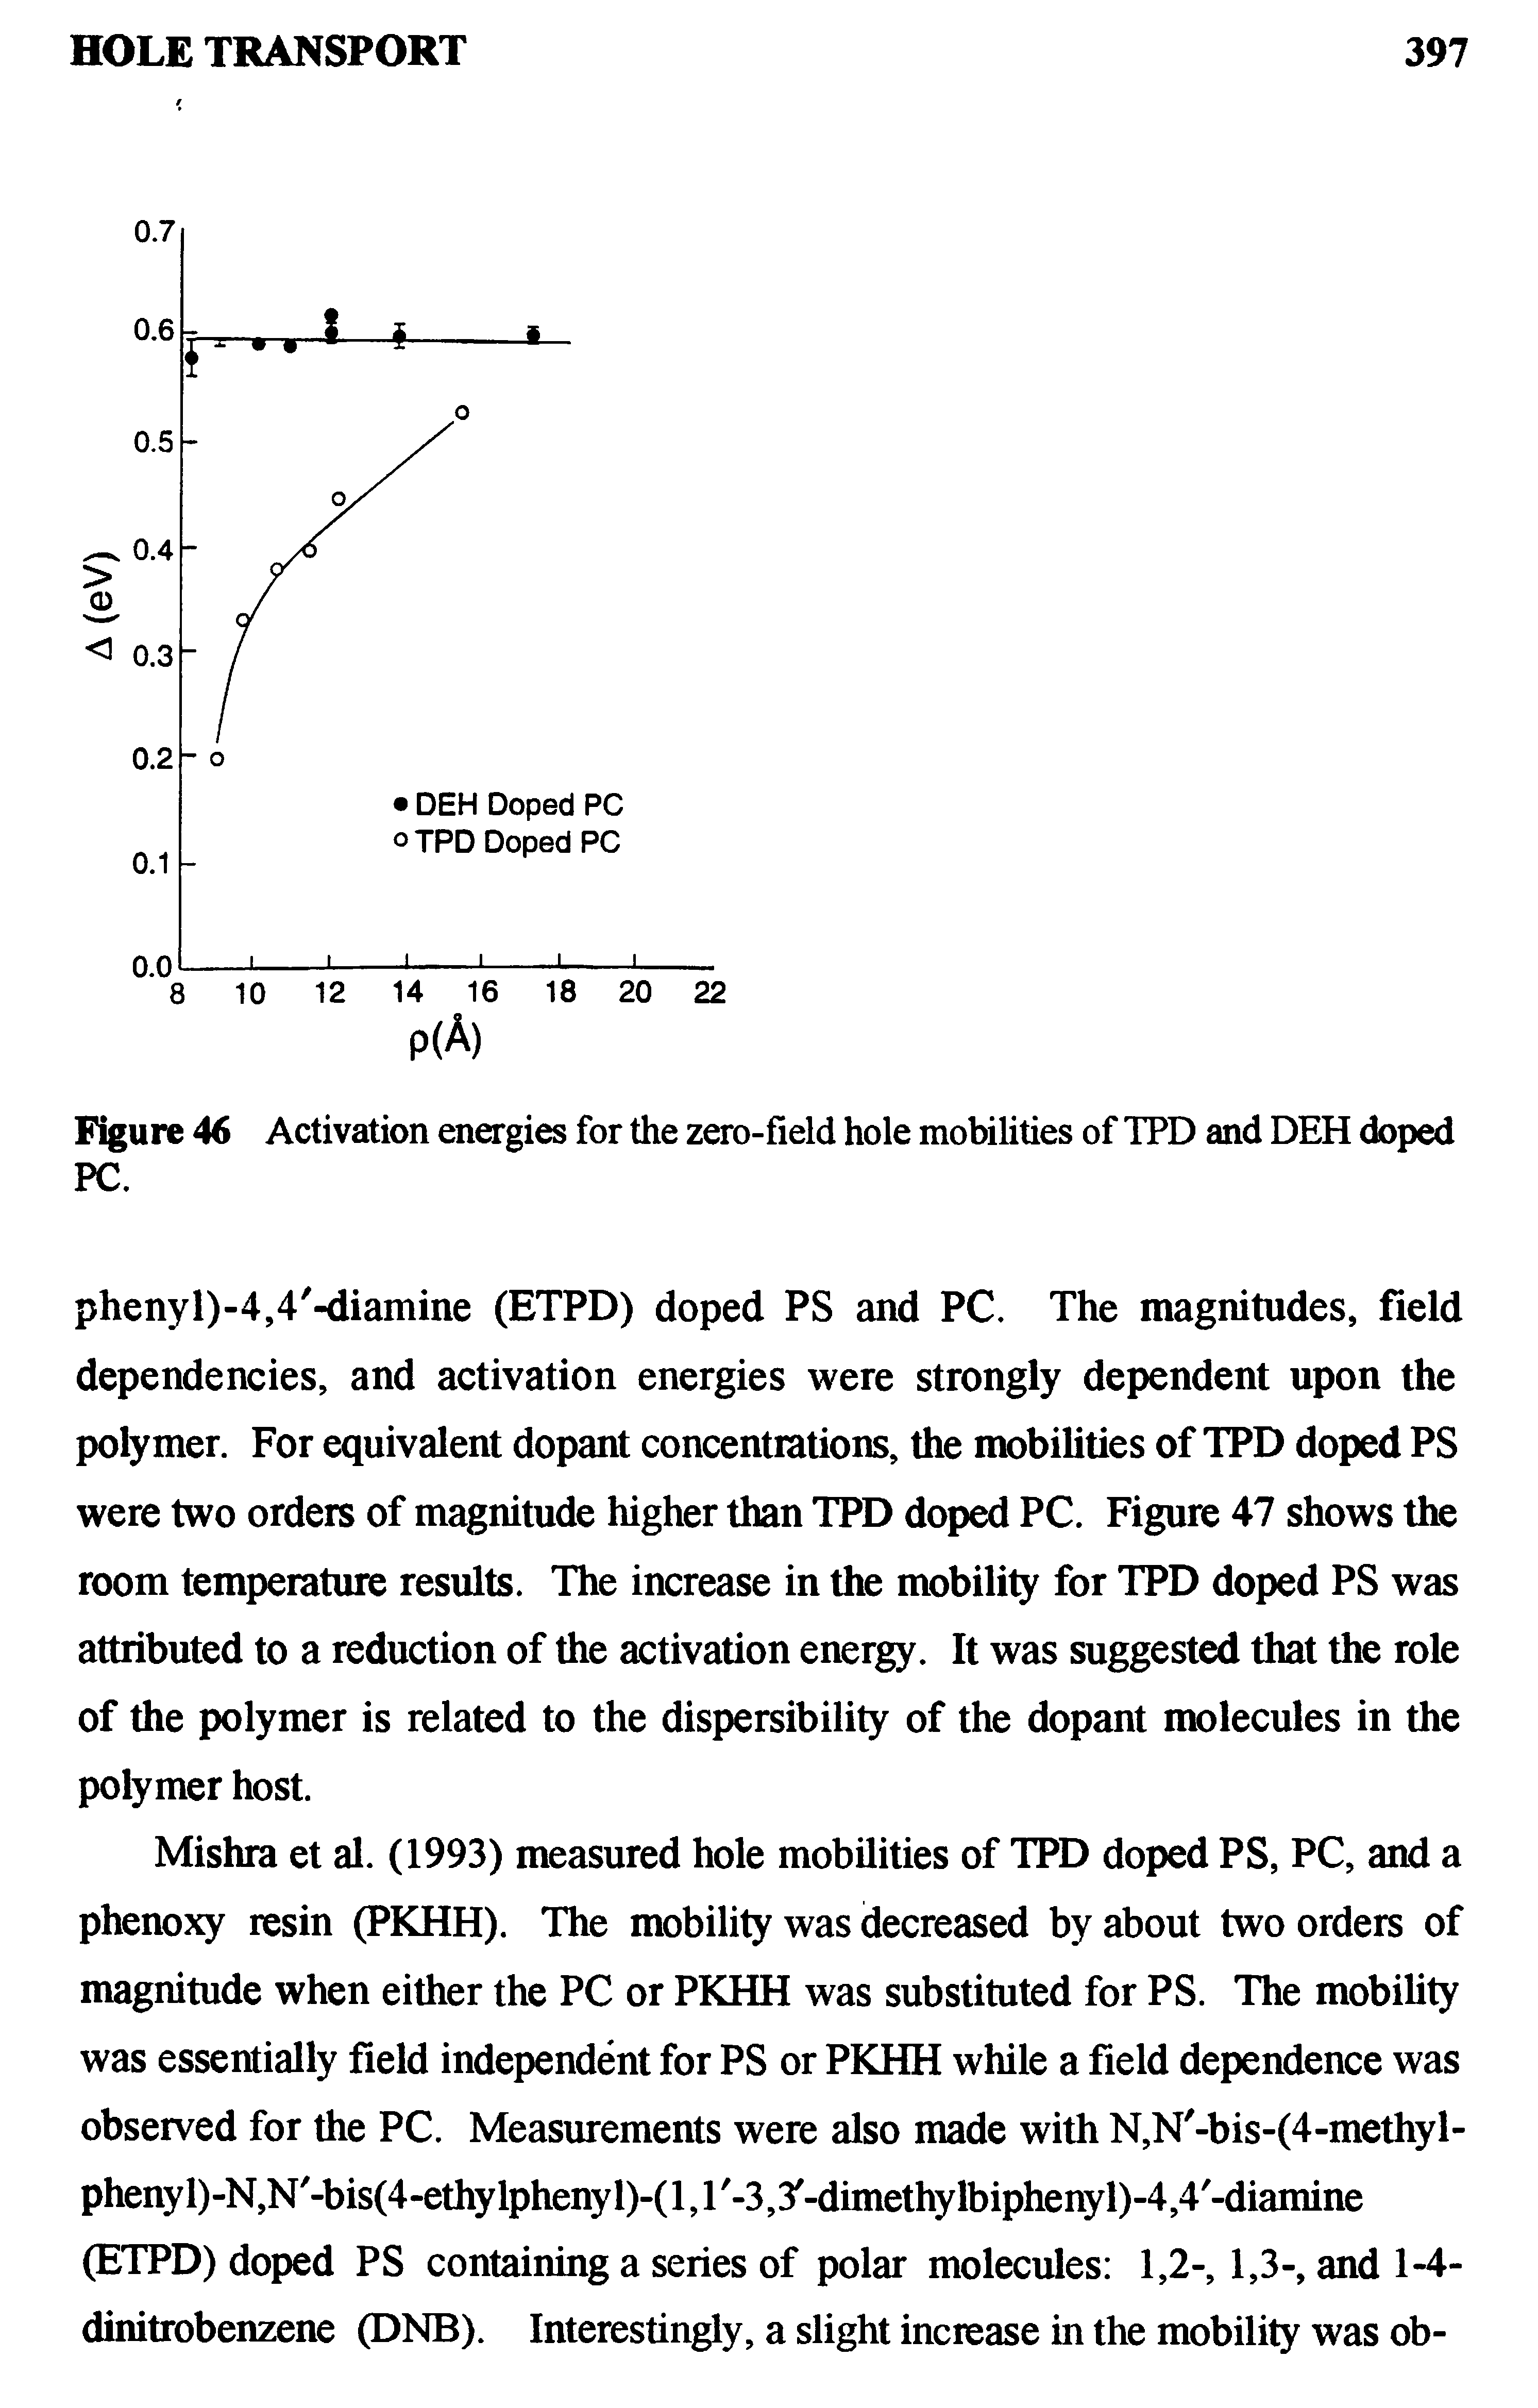 Figure 46 Activation energies for the zero-field hole mobilities of TPD and DEH doped PC.